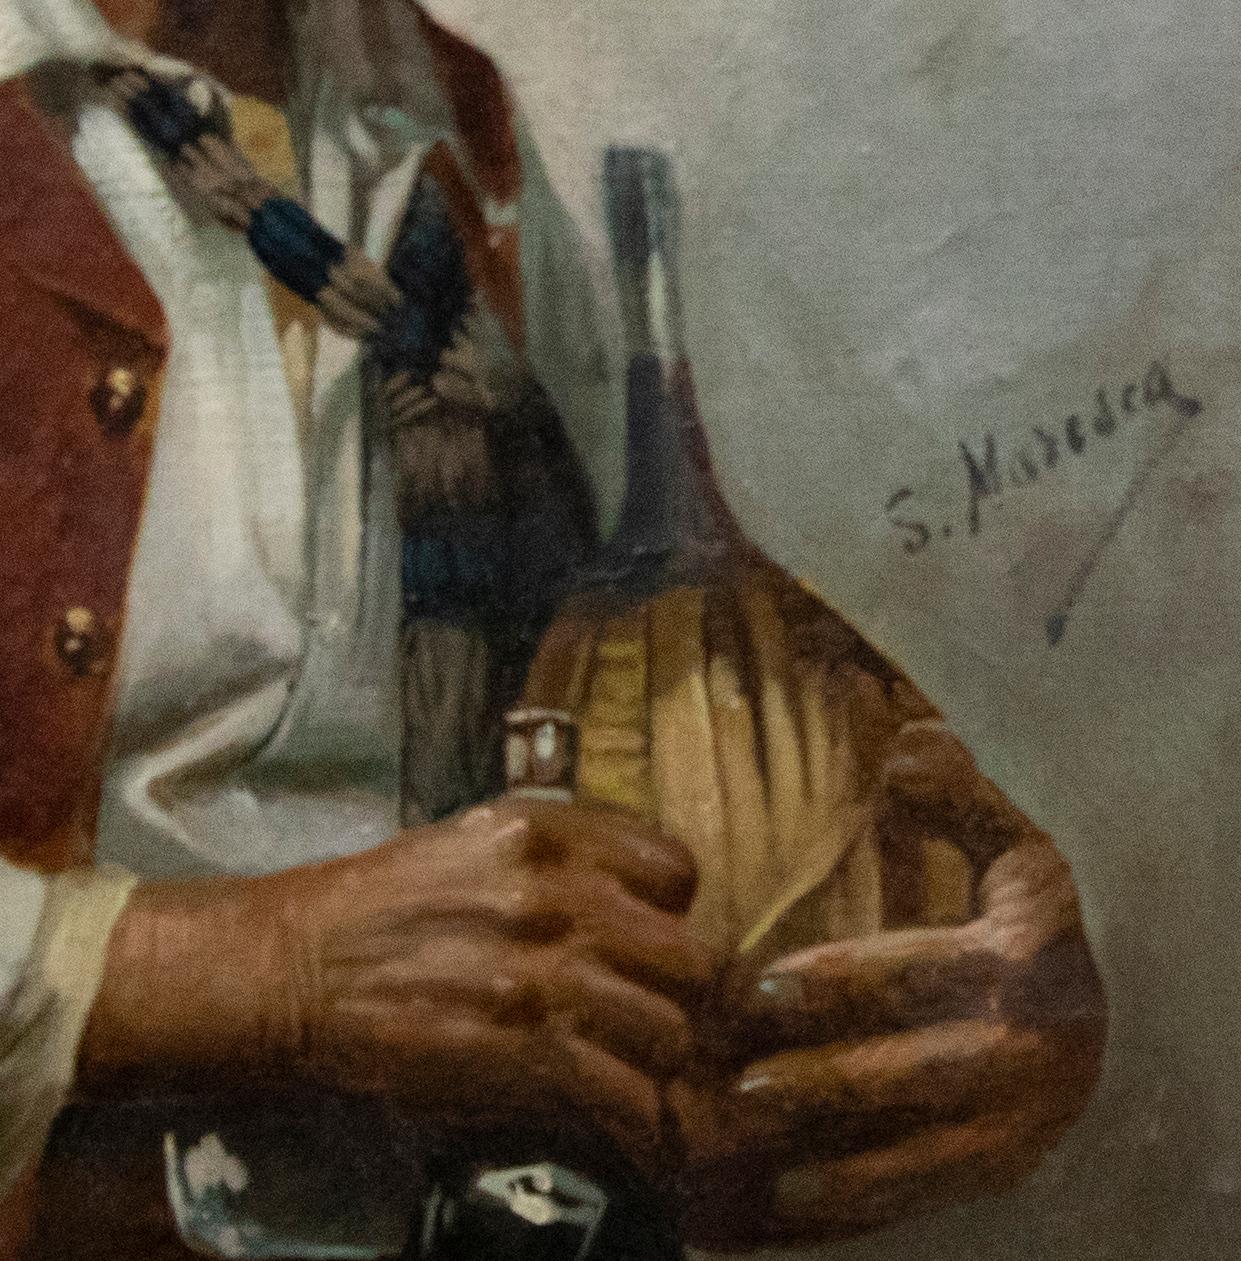 A charismatic portrait of an elderly gentleman clutching a bottle of red wine and a full fiasco. Signed' S. Maresca' to the lower right. Copied from the artist's original work. On canvas on stretchers.